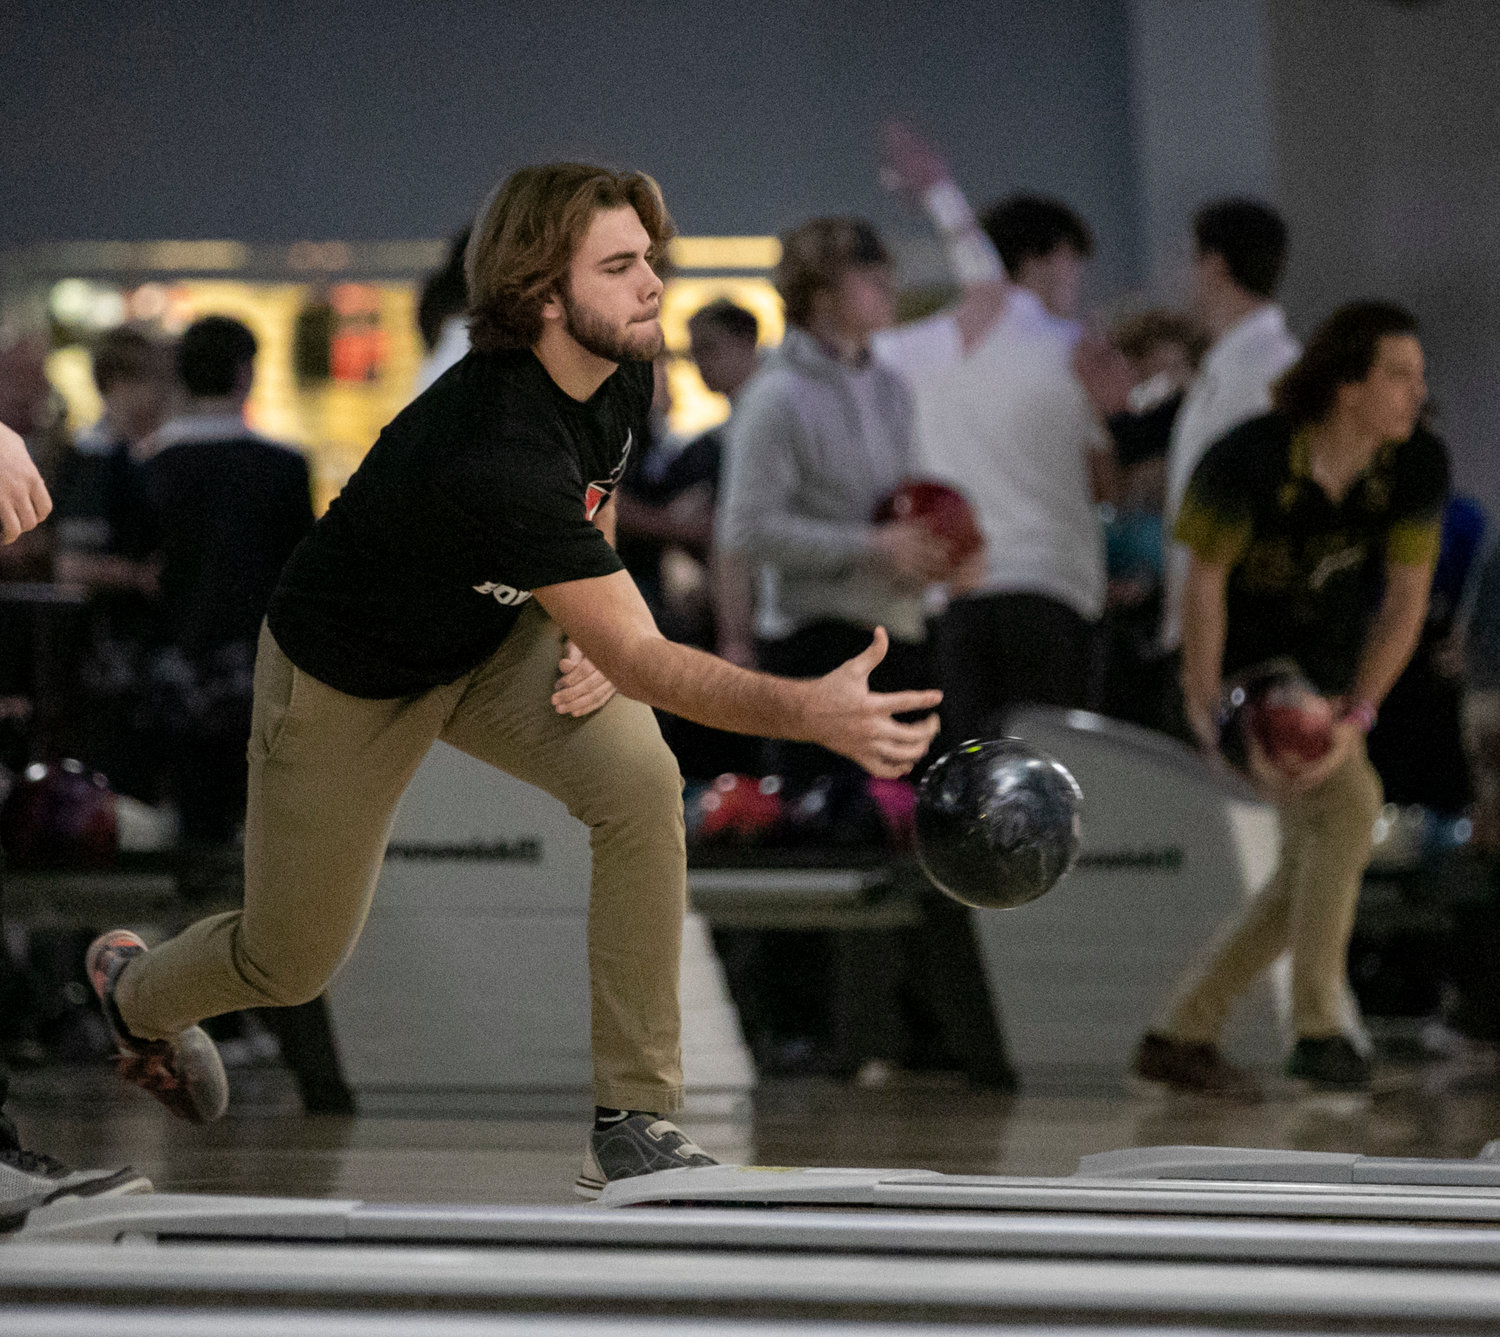 Spanish Fort's Anthony Passarelli rolls an attempt during Thursday’s qualifying round of the AHSAA South Regional bowling tournament at Eastern Shore Lanes. Passarelli and the Toros were one of four local teams to earn a spot in the top half of tomorrow’s single-elimination bracket with a trip to state on the line.